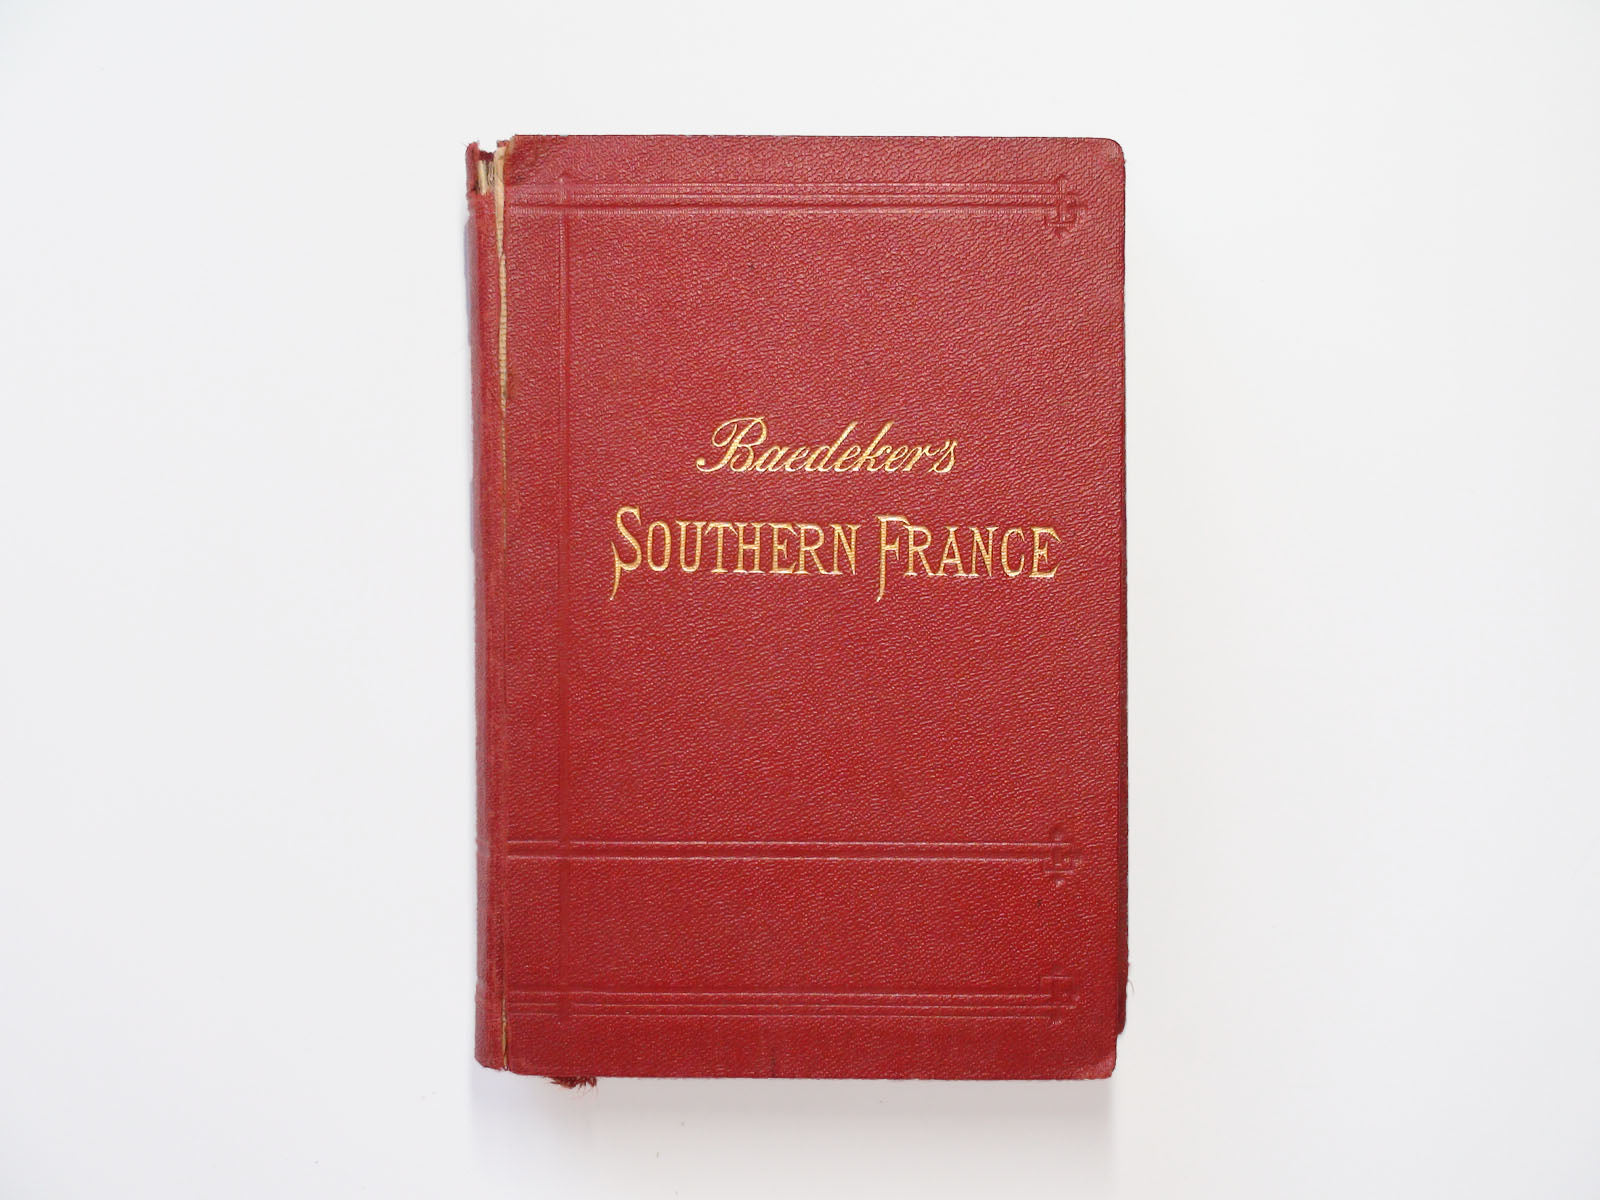 Baedeker, Southern France Including Corsica, with Maps, by Karl Baedeker, 1914